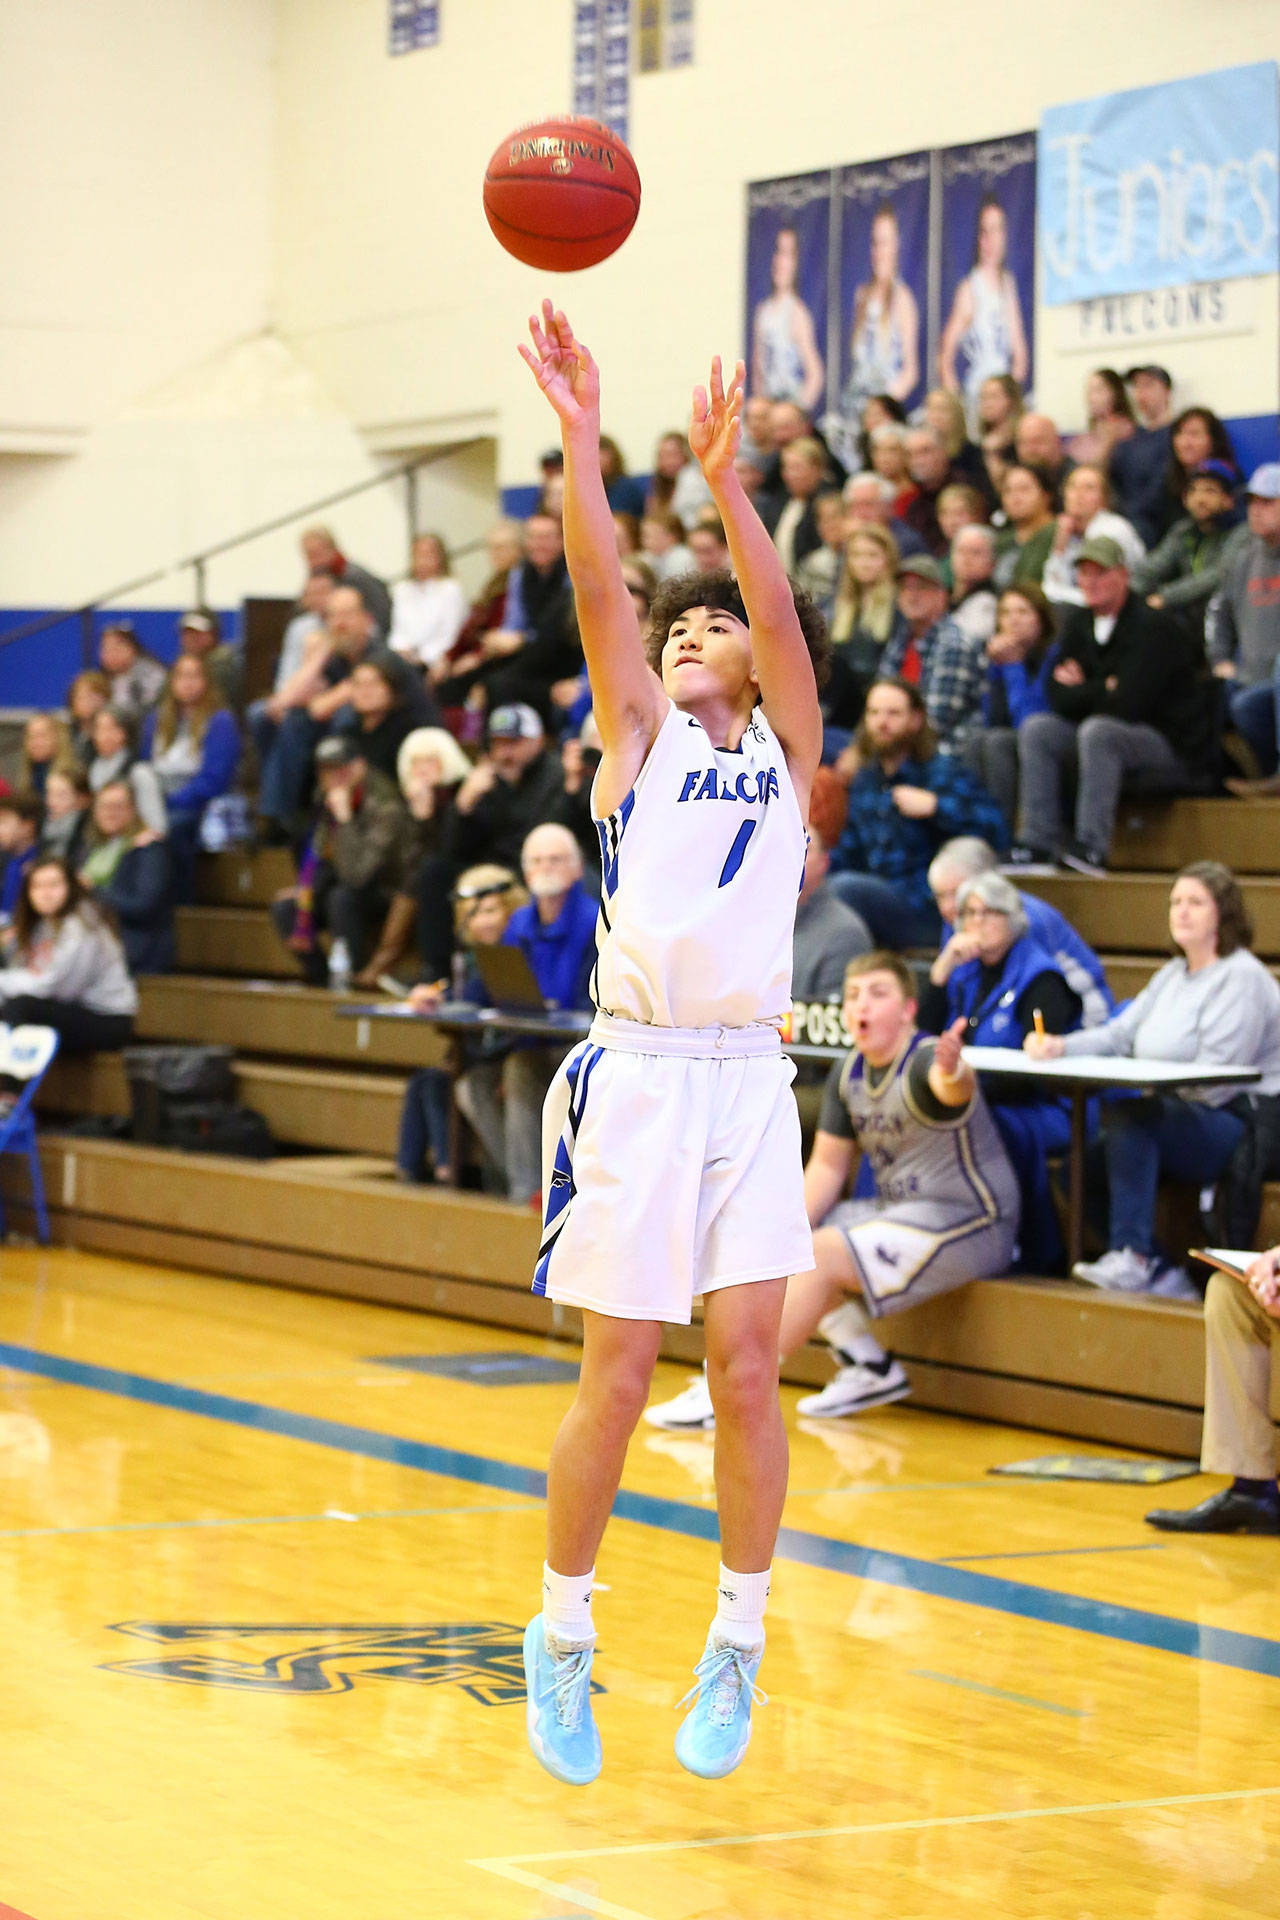 Jacob Ng fires up a three-pointer.(Photo by John Fisken)